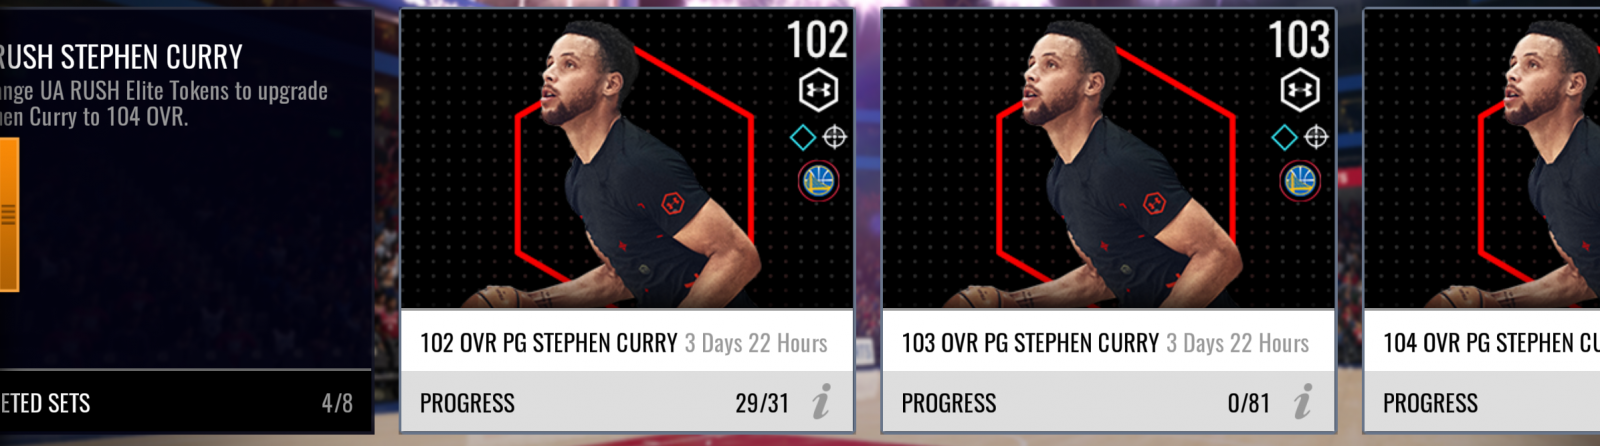 Under Armour RUSH x NBA LIVE Mobile Campaign